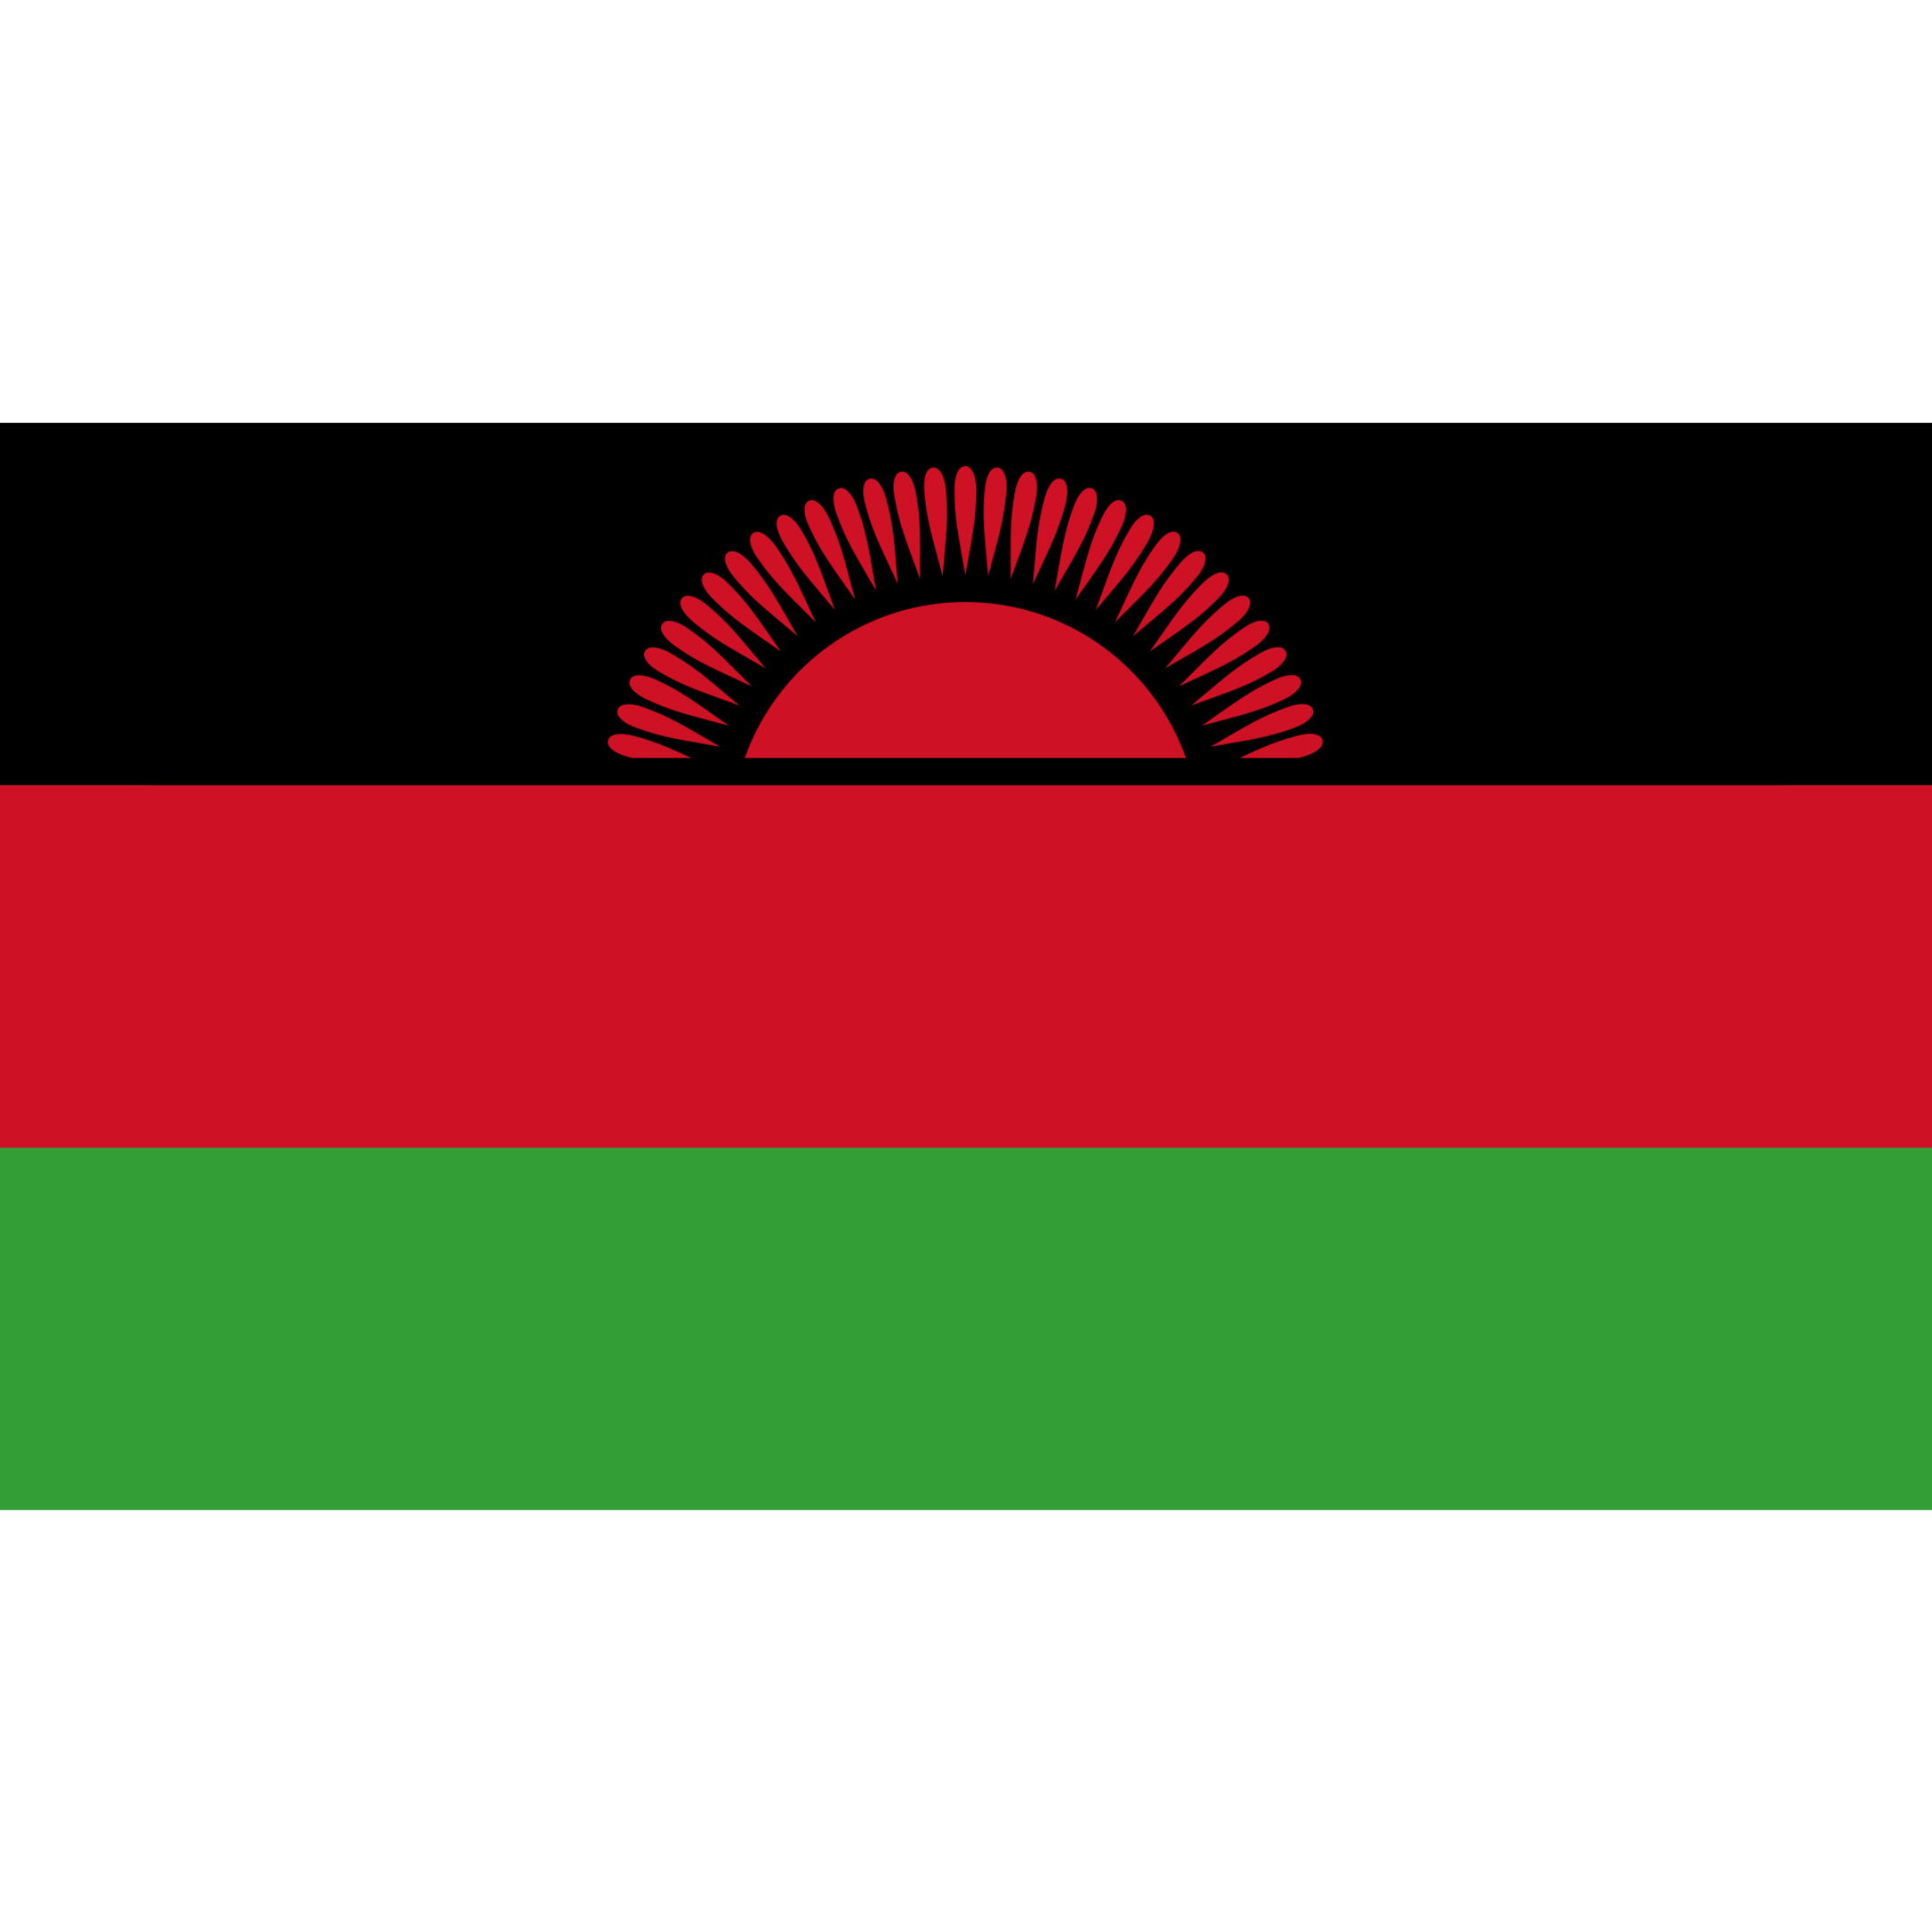 The Malawi Flag consists of 3 horizontal black, red and green bands, with a red rising sun centred on the top black band.